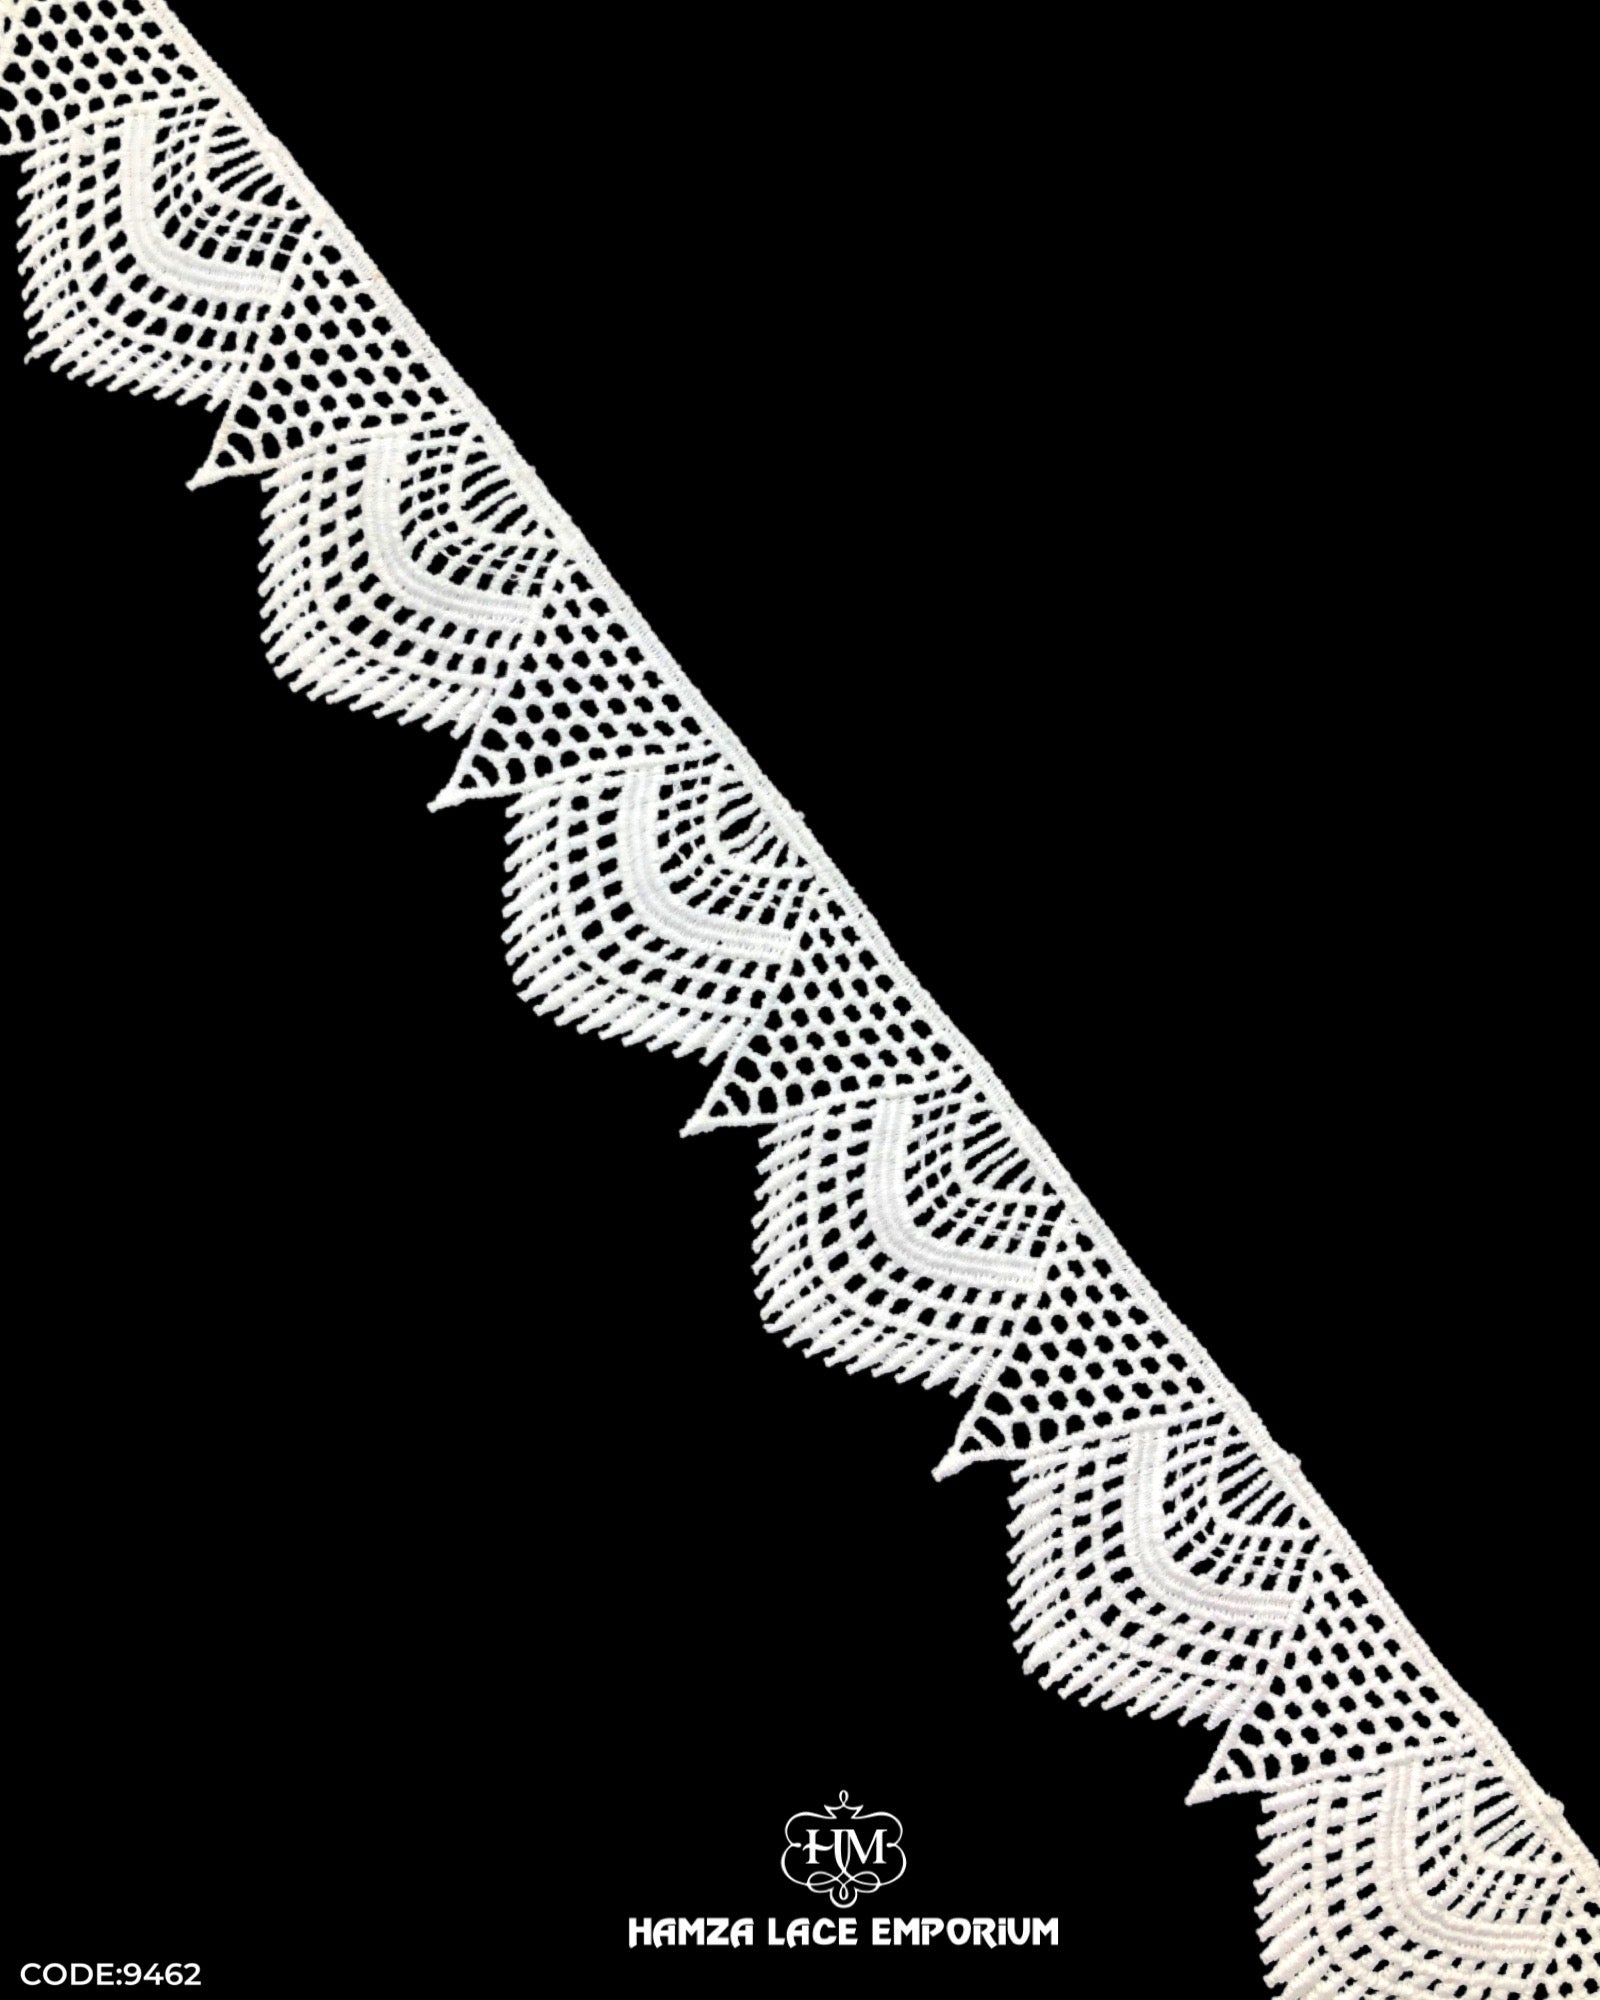 'Edging Scallop Lace 9462' with 'Hamza Lace' Sign at the bottom